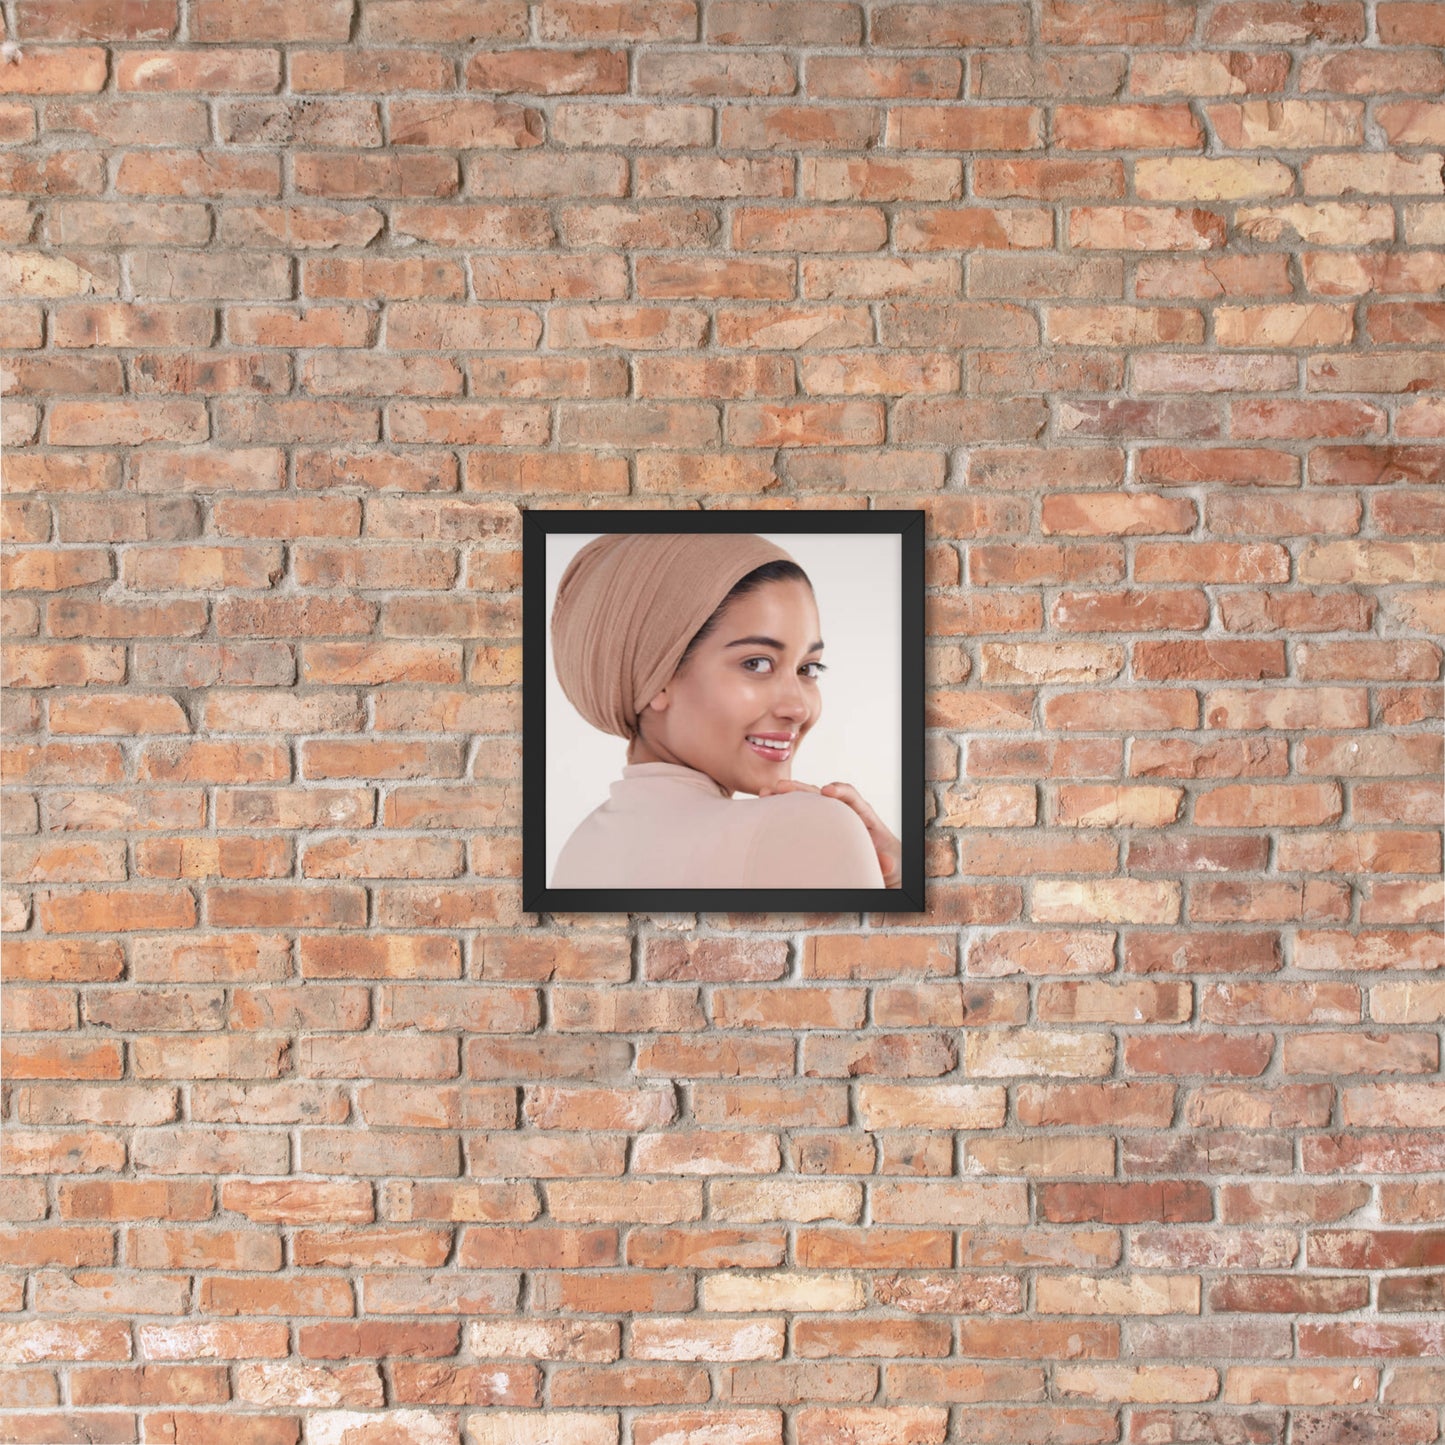 Framed Poster Wall Art Vertical: Priceless Smiles and Laughter (Print Model 0040)